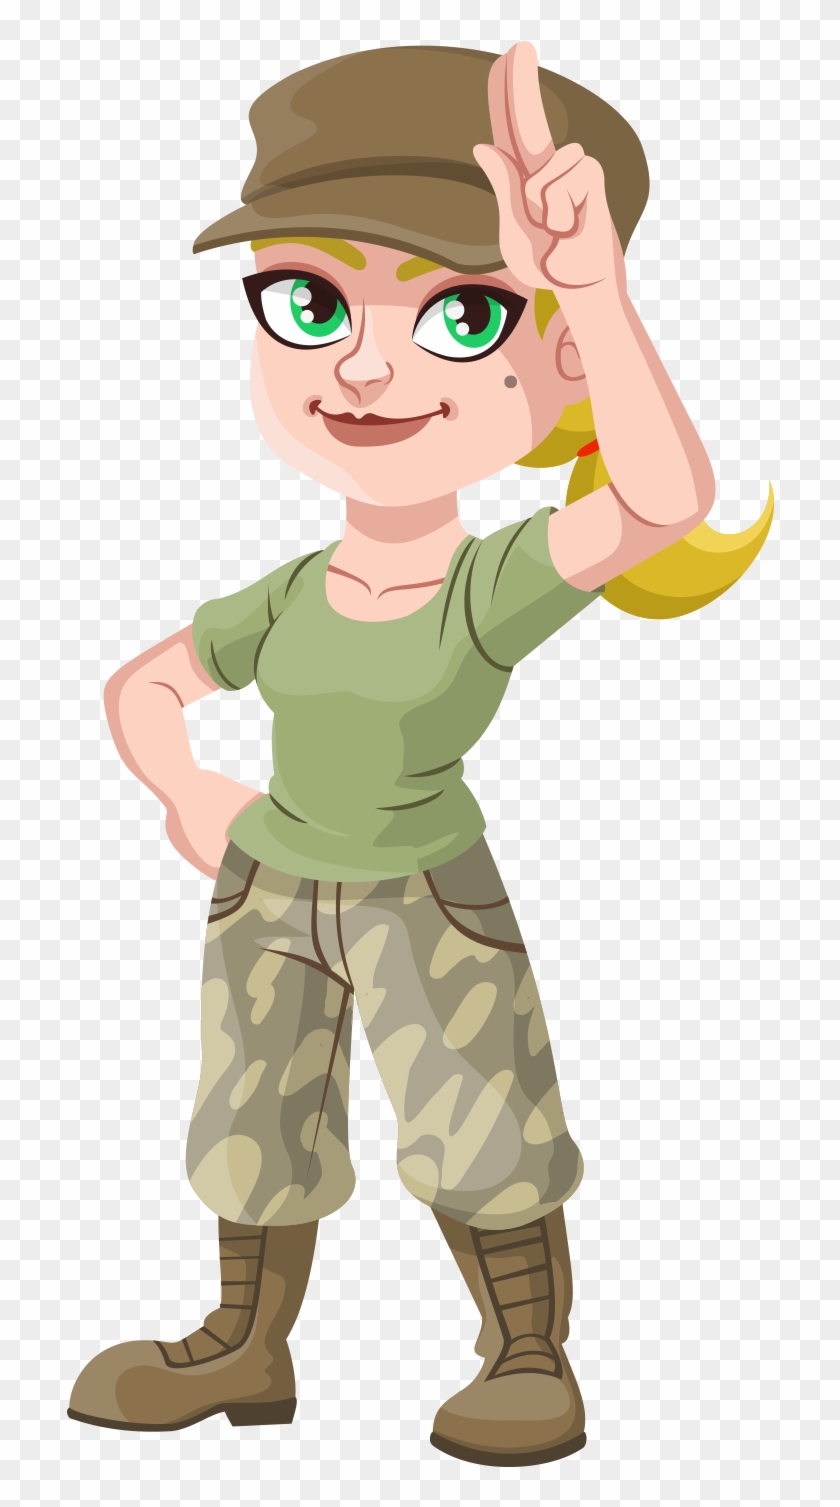 Cartoon Soldier Drawing Illustration Girl Soldier Cartoon Free Transparent Png Clipart Images Download Soldier cartoon 25 of 1772 some boots on the ground to see you, mr grunwald. artist: cartoon soldier drawing illustration